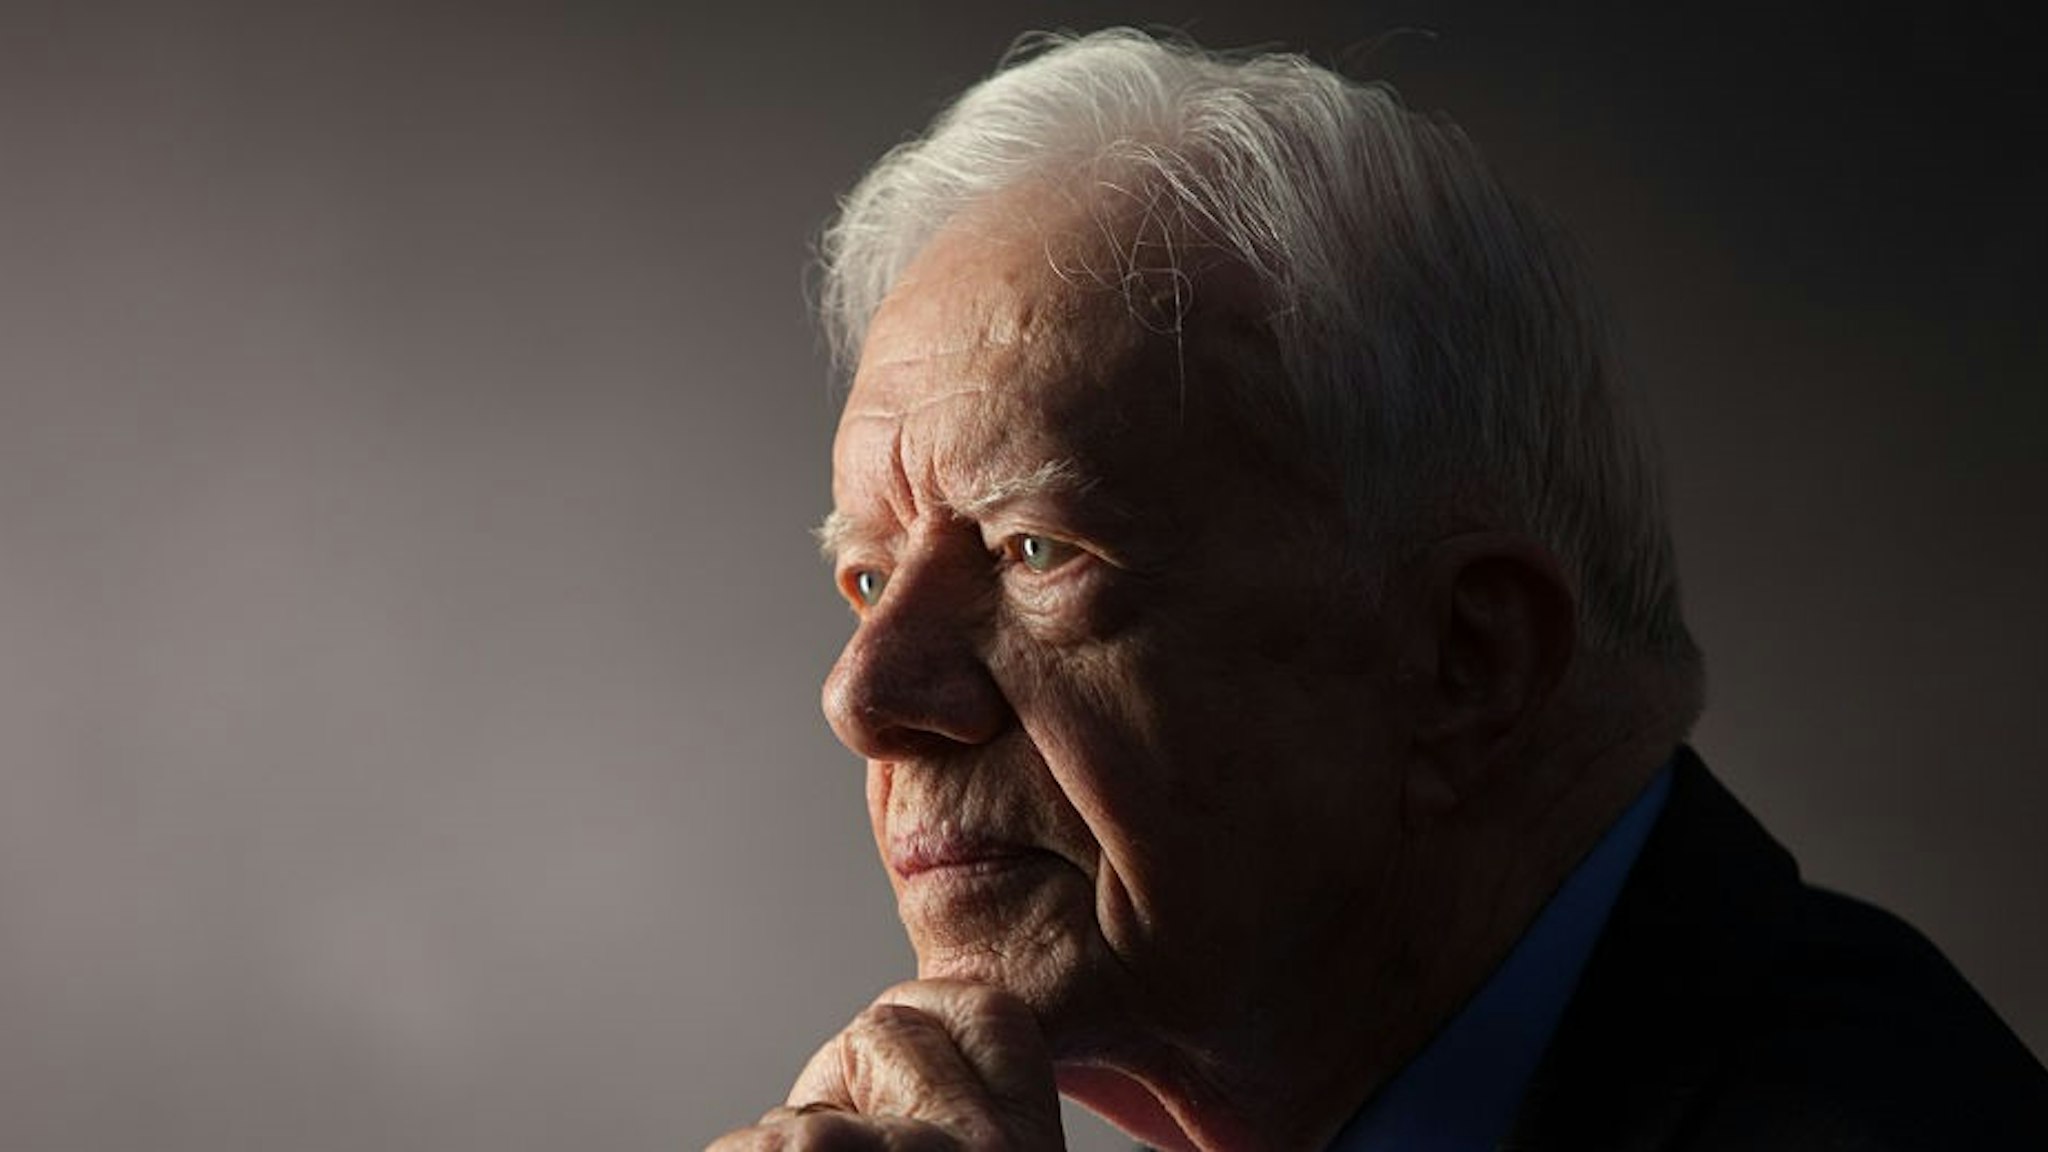 ATLANTA -- SEPT 14: Former President Jimmy Carter interviewed for "The Presidents' Gatekeepers" project at the Carter Center, Atlanta, Georgia, September 14, 2011. (Photo by